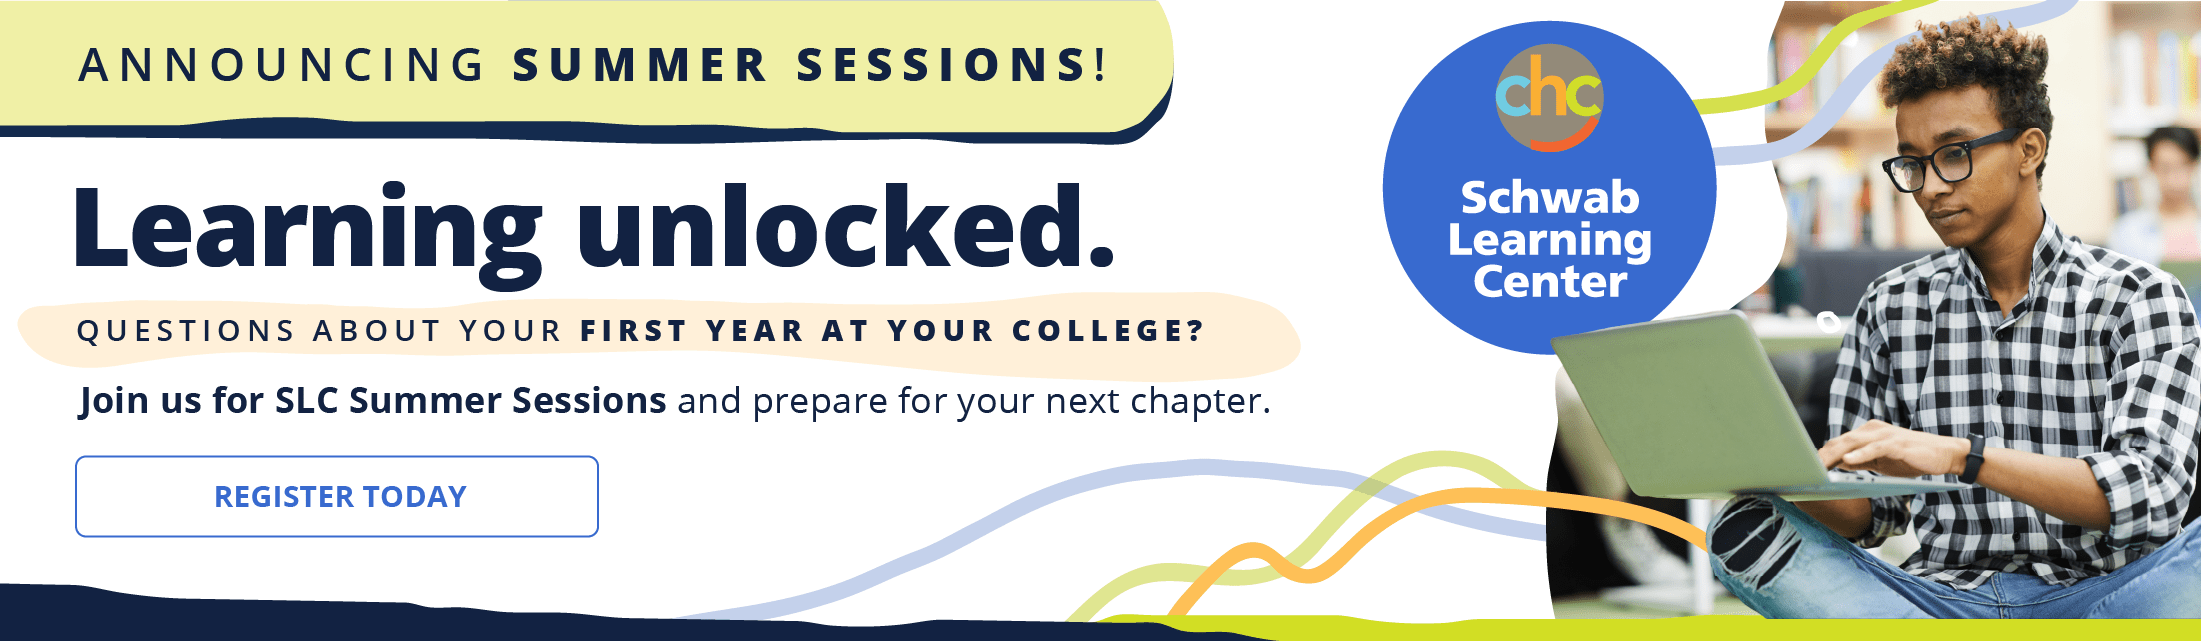 Announcing Summer Sessions! Learning unlocked. Questions about your first year at your college? Join us for SLC Summer Sessions and prepare for your next chapter. CHC Schwab Learning Center. Register Today